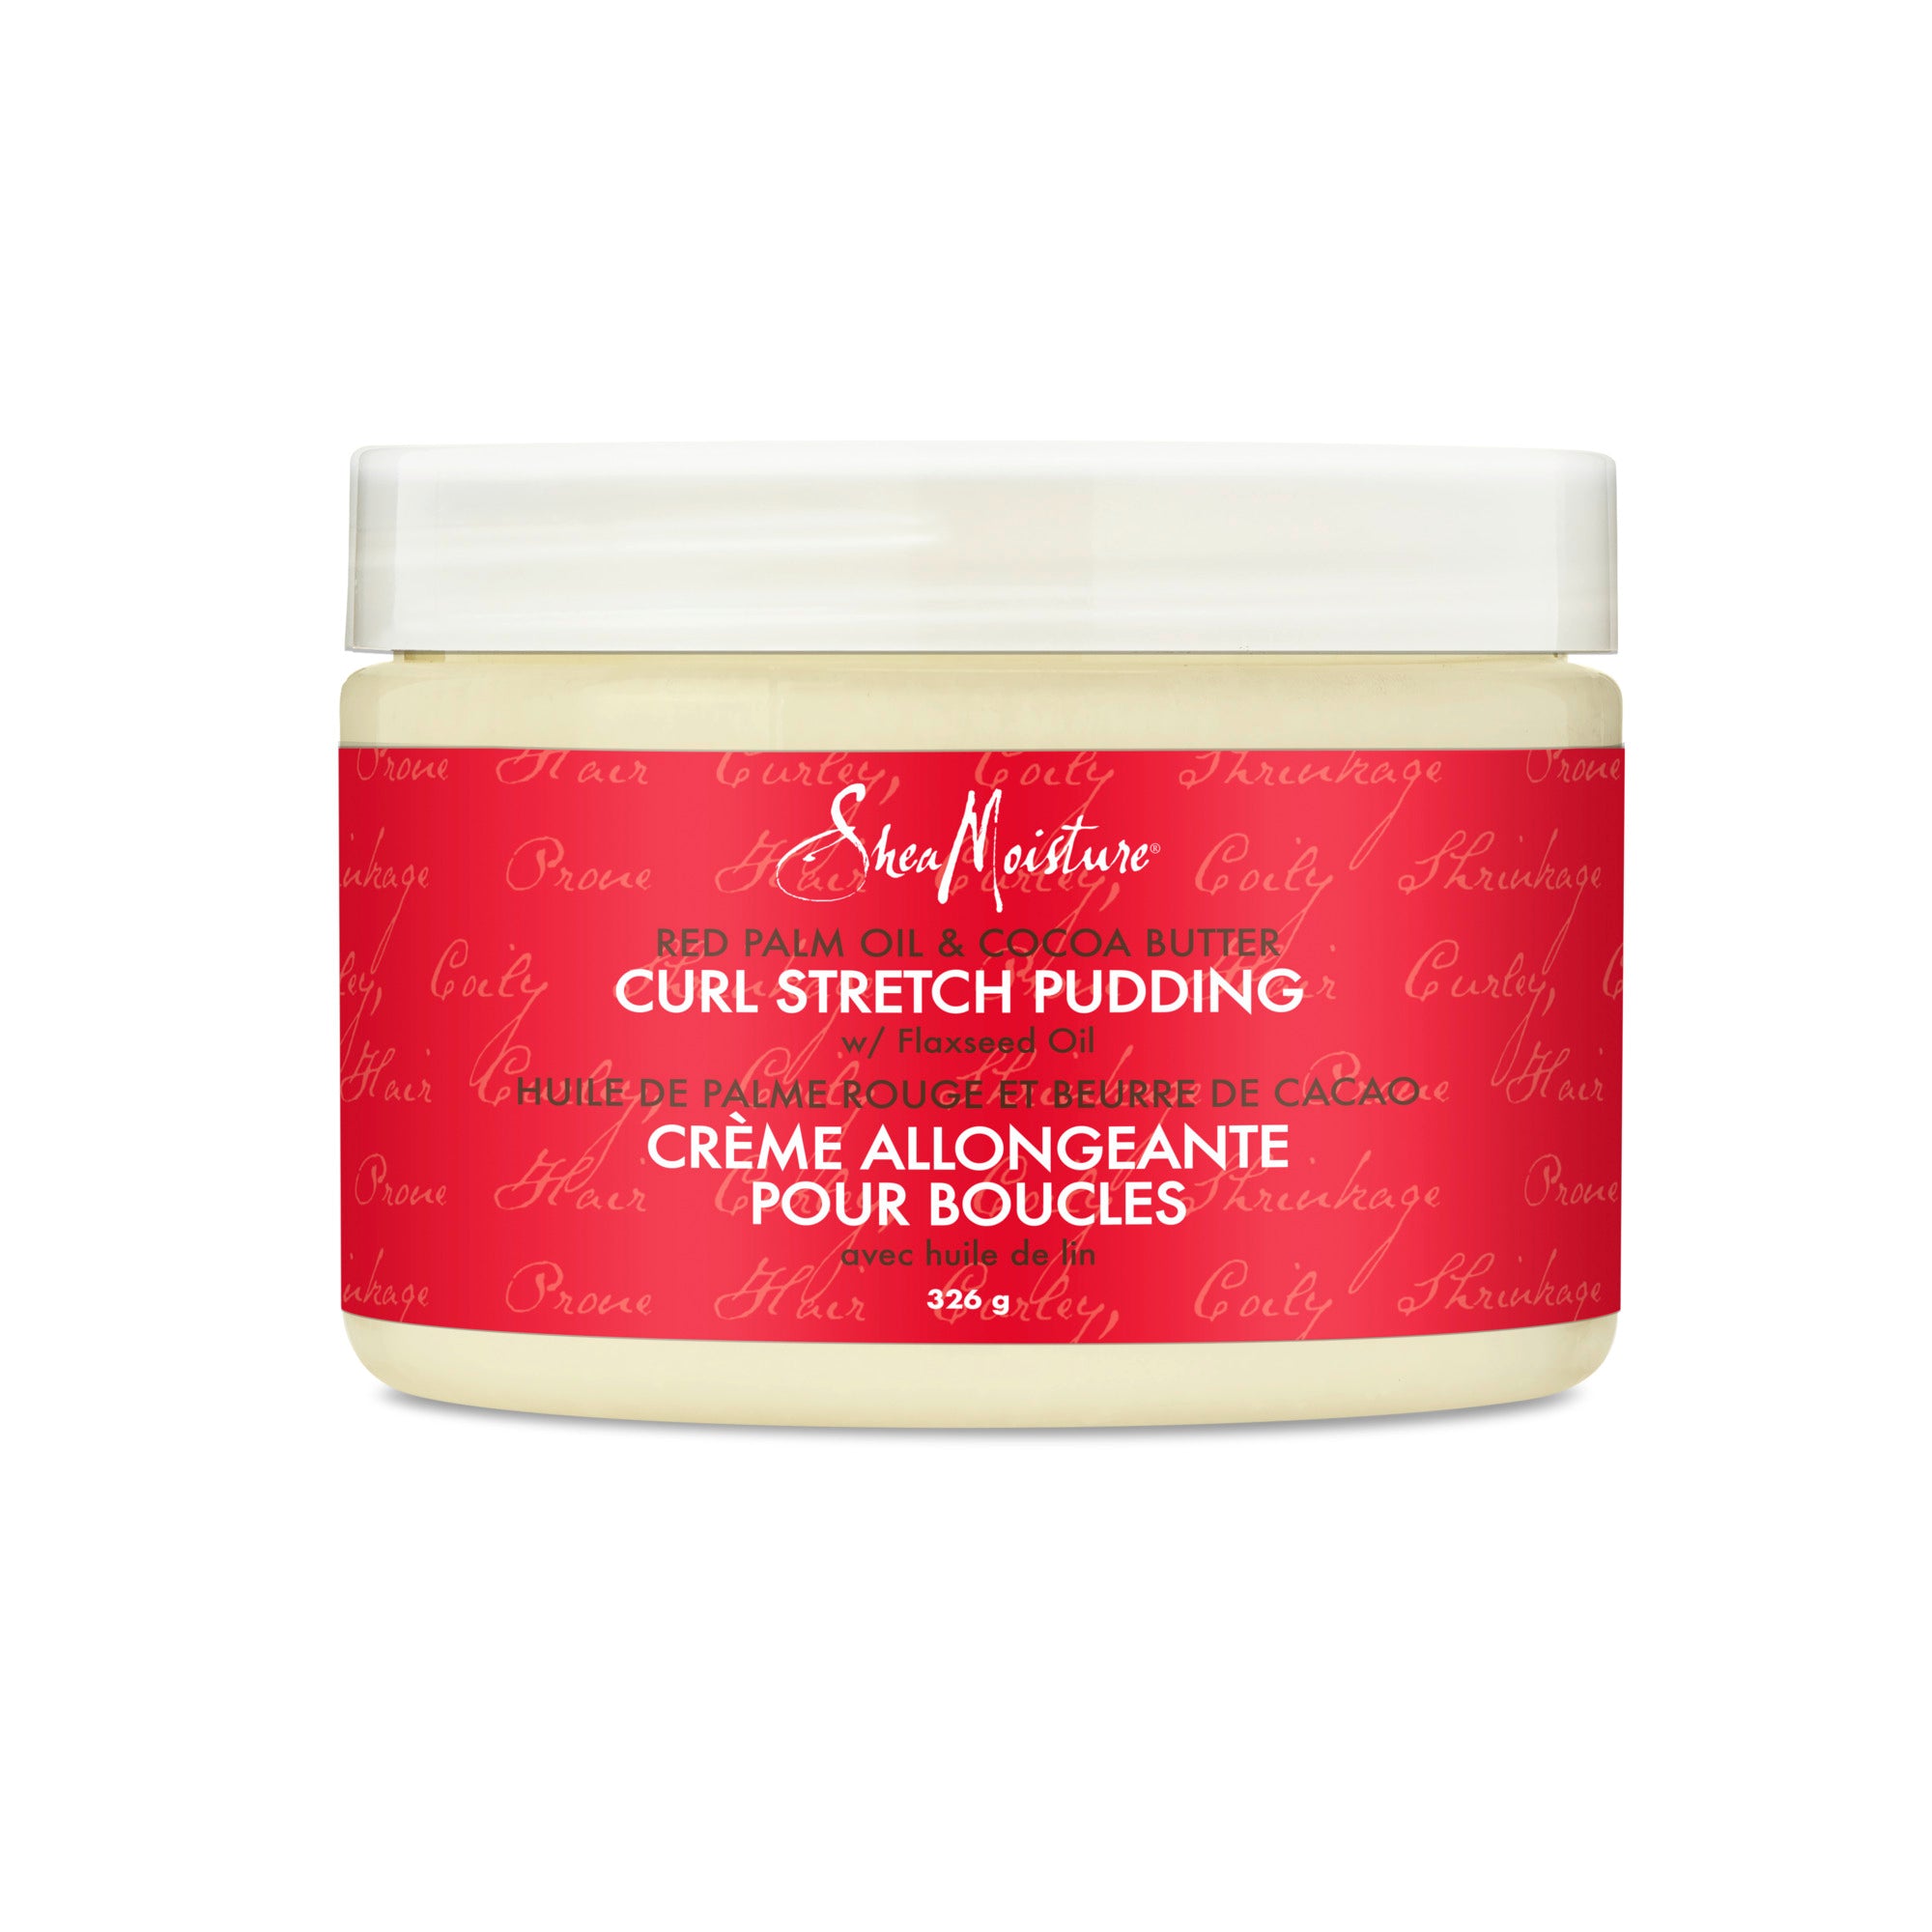 Showing the front angle view of the SheaMoisture Red Palm Oil & Cocoa Butter Curl Stretch Pudding 326g product.